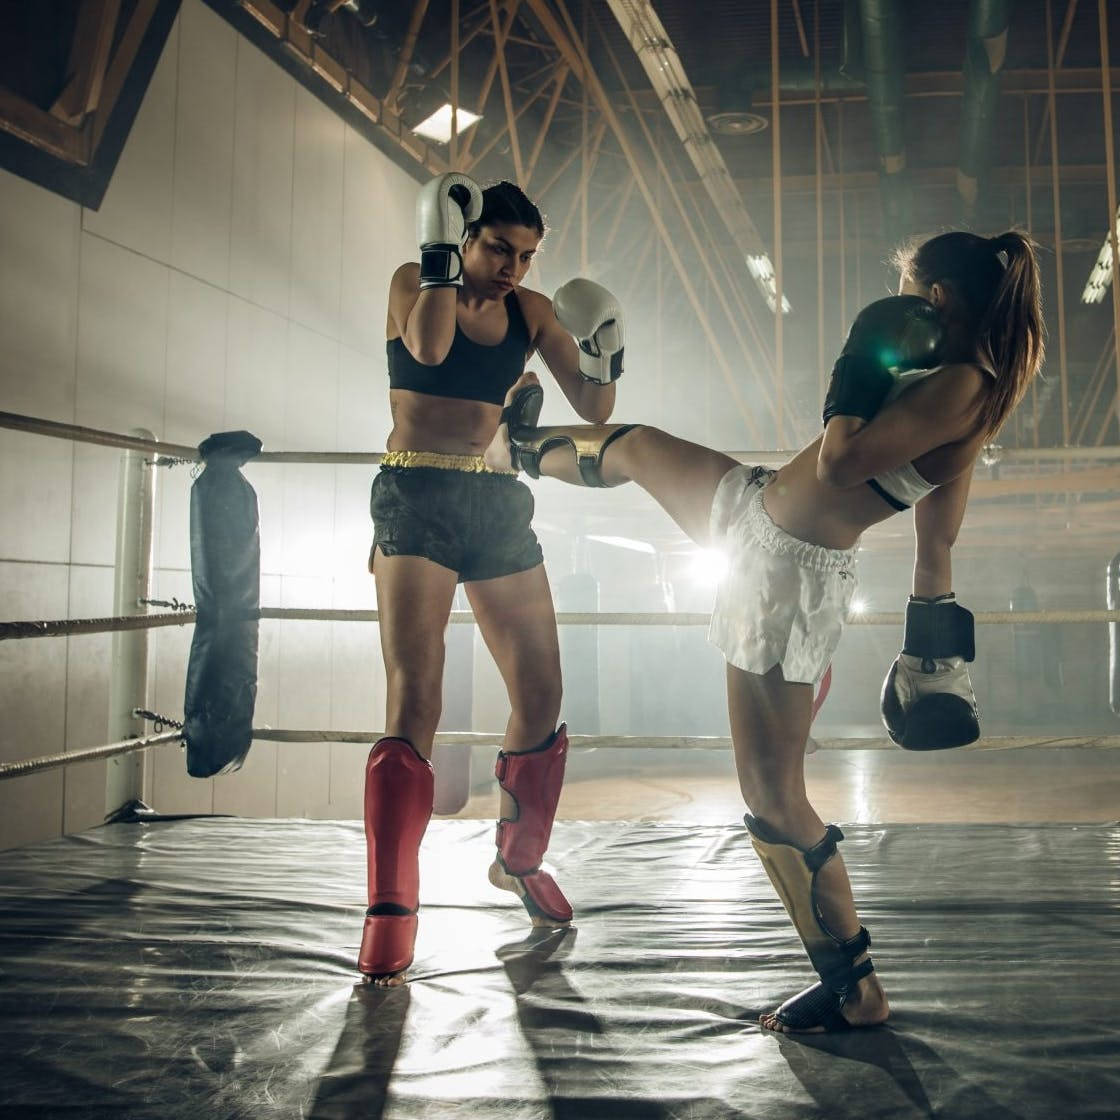 Intense Kickboxing Sparring Session Among Two Female Athletes. Wallpaper